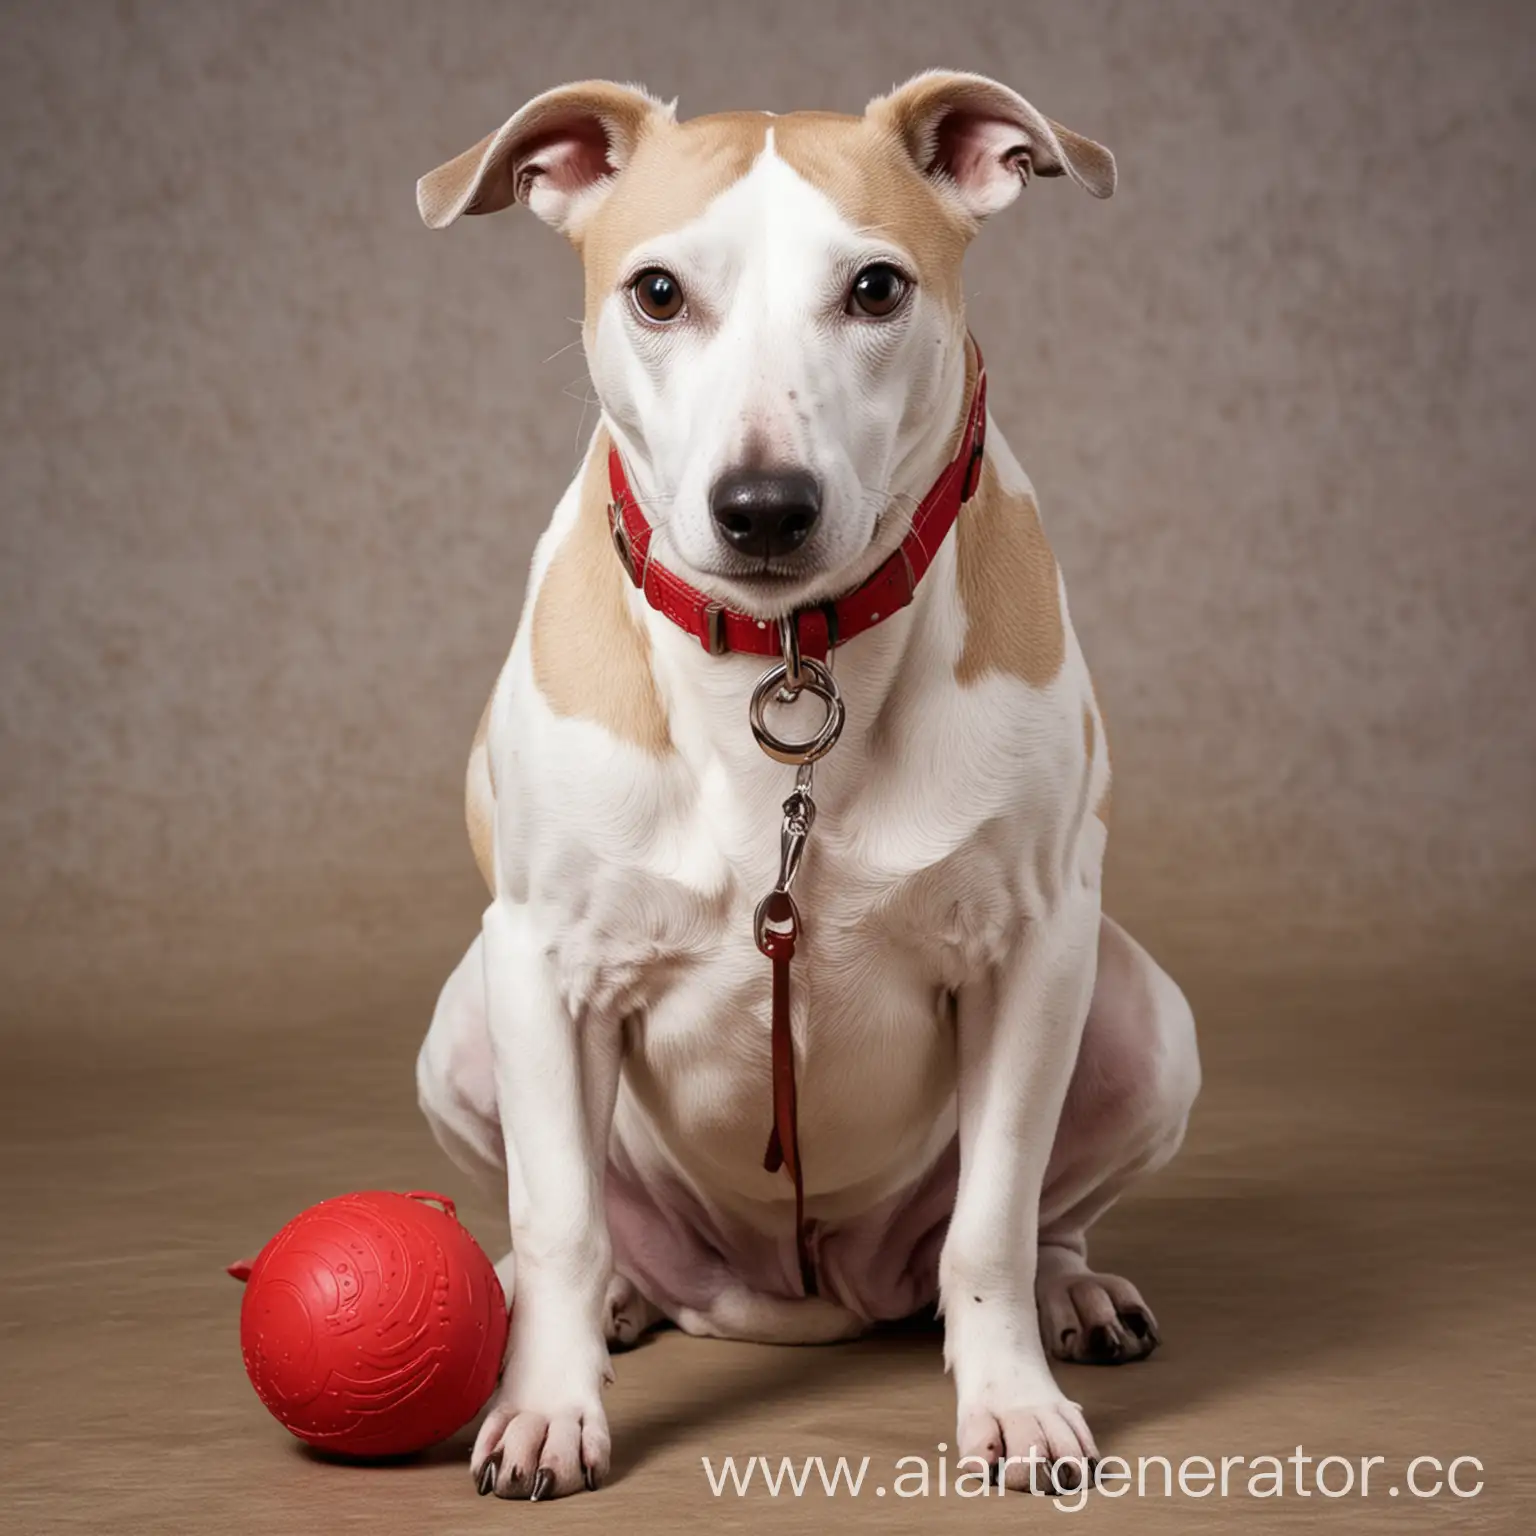 Adorable-Chubby-Whippet-Dog-with-Red-and-White-Coat